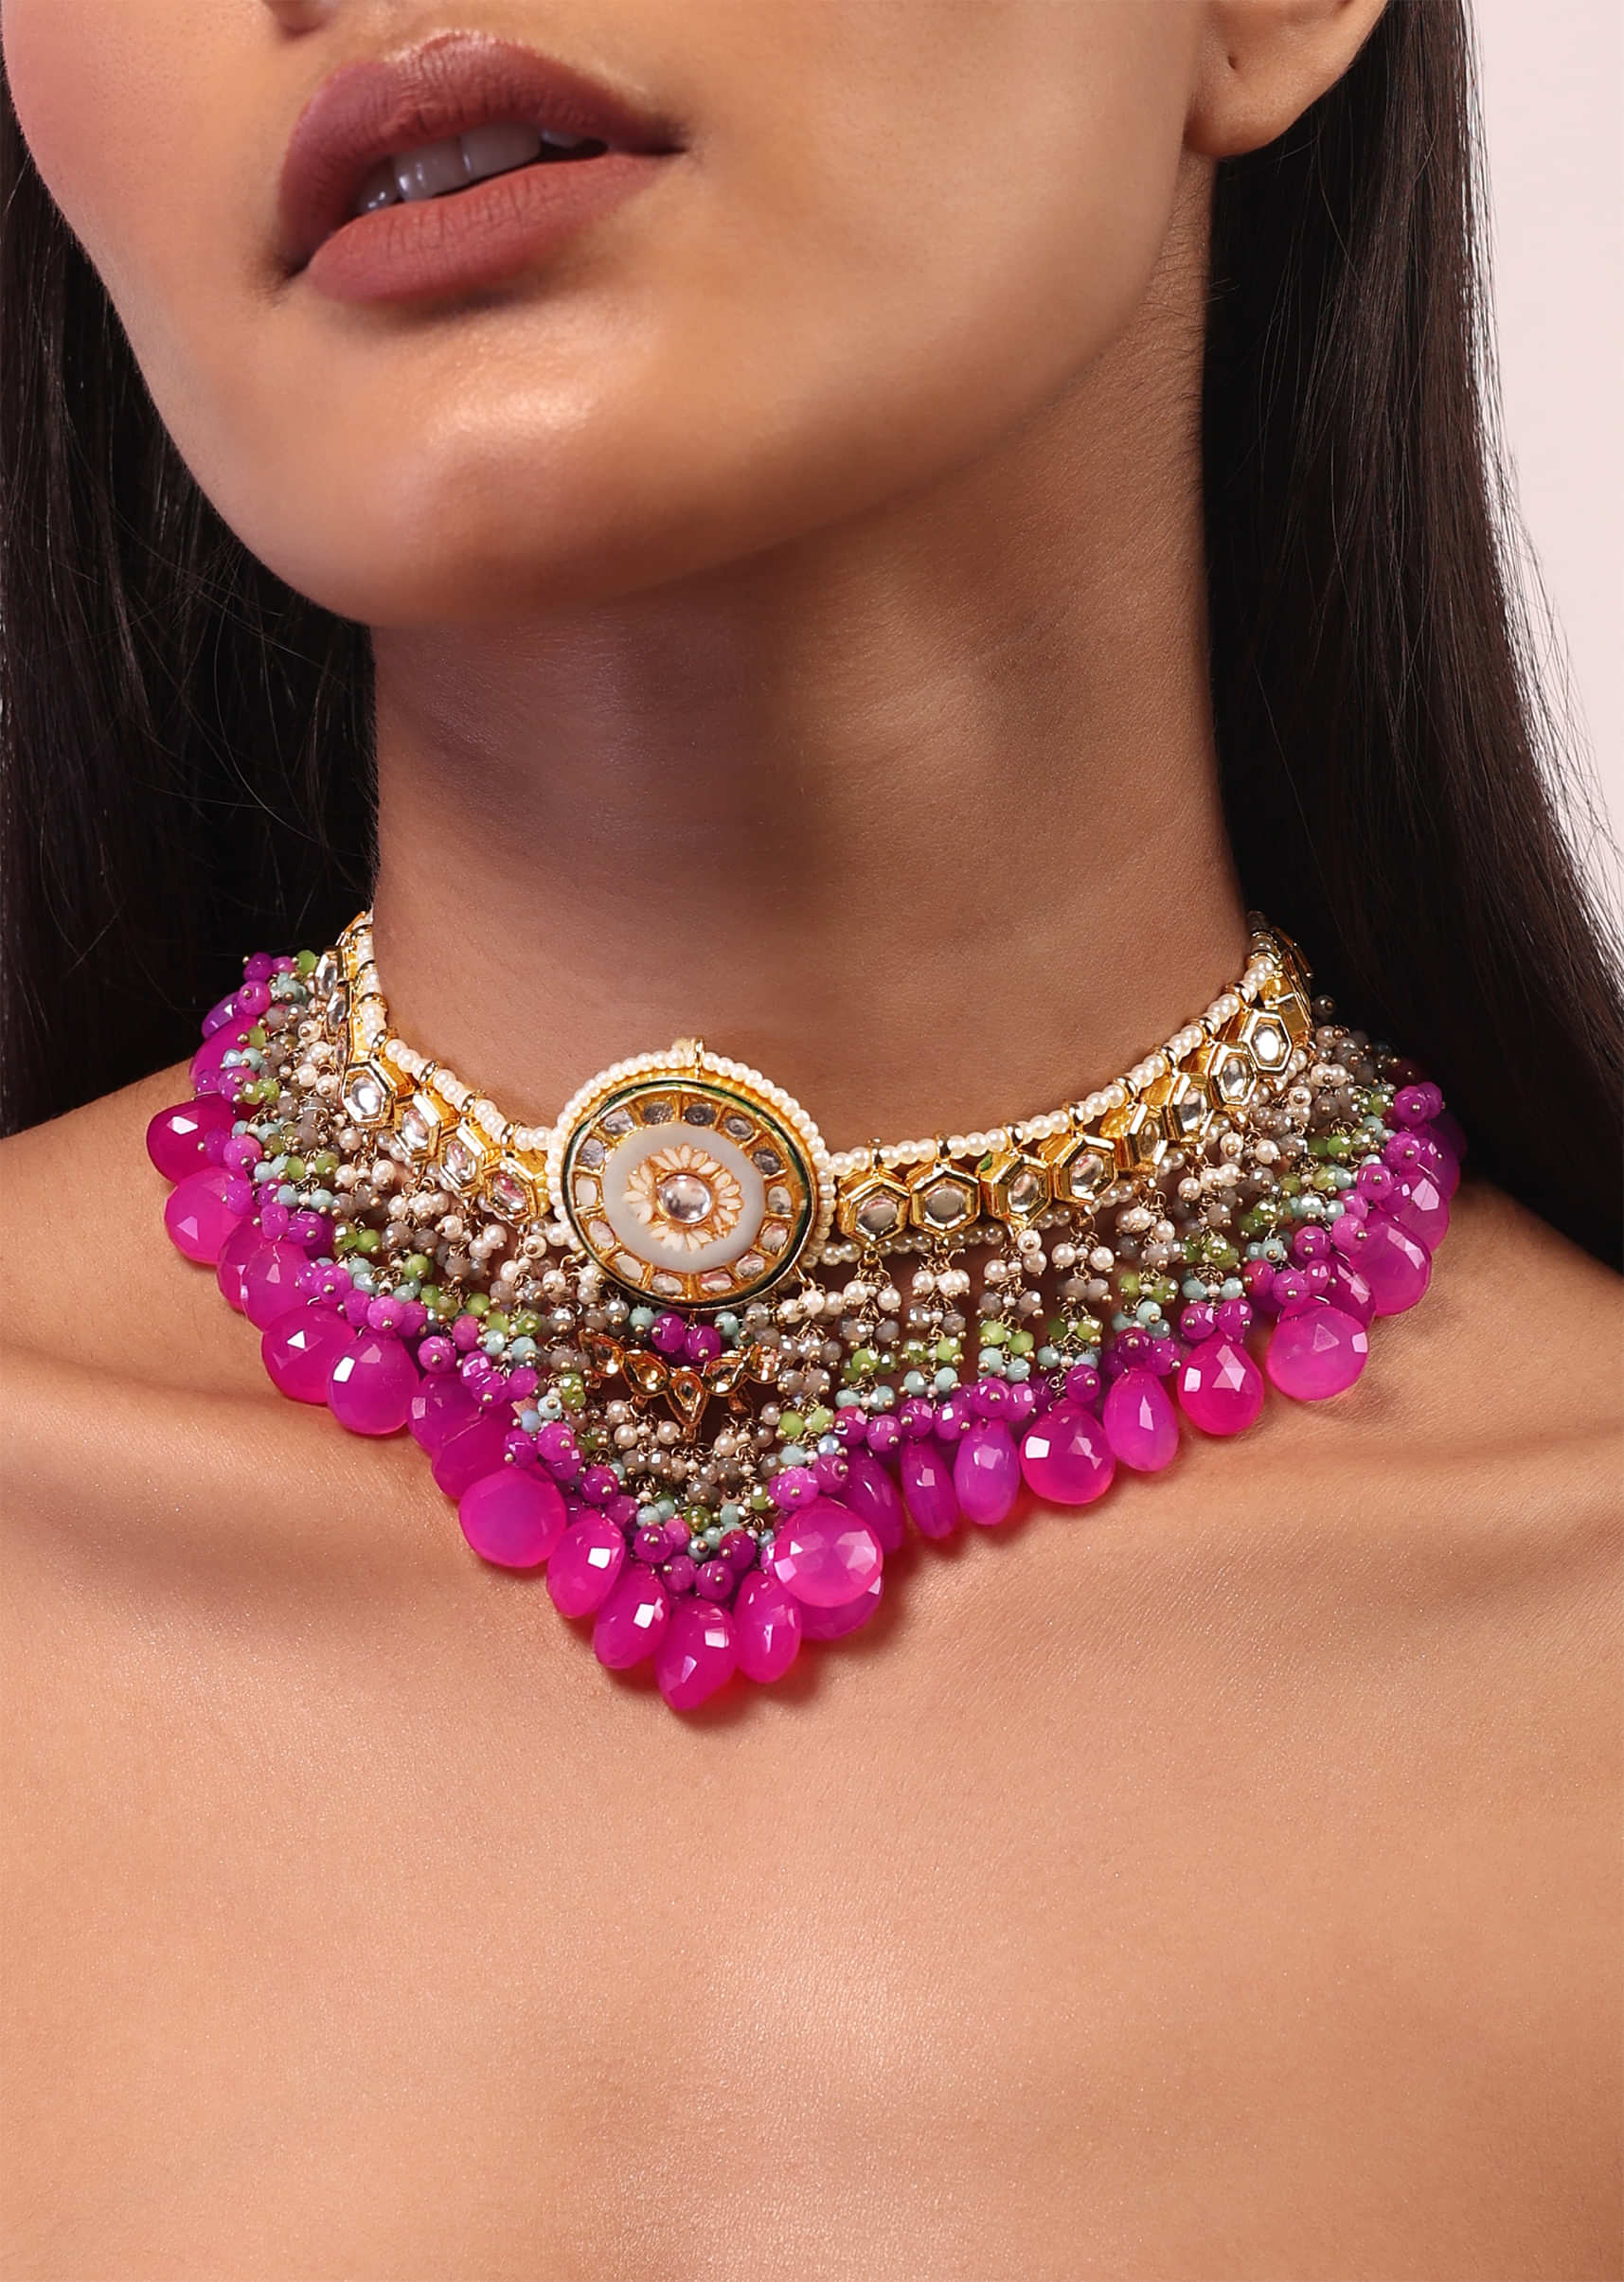 Gold Plated Kundan Necklace With Grey Floral Minakari Centre, Pink Stone Drops And Bead Fringes